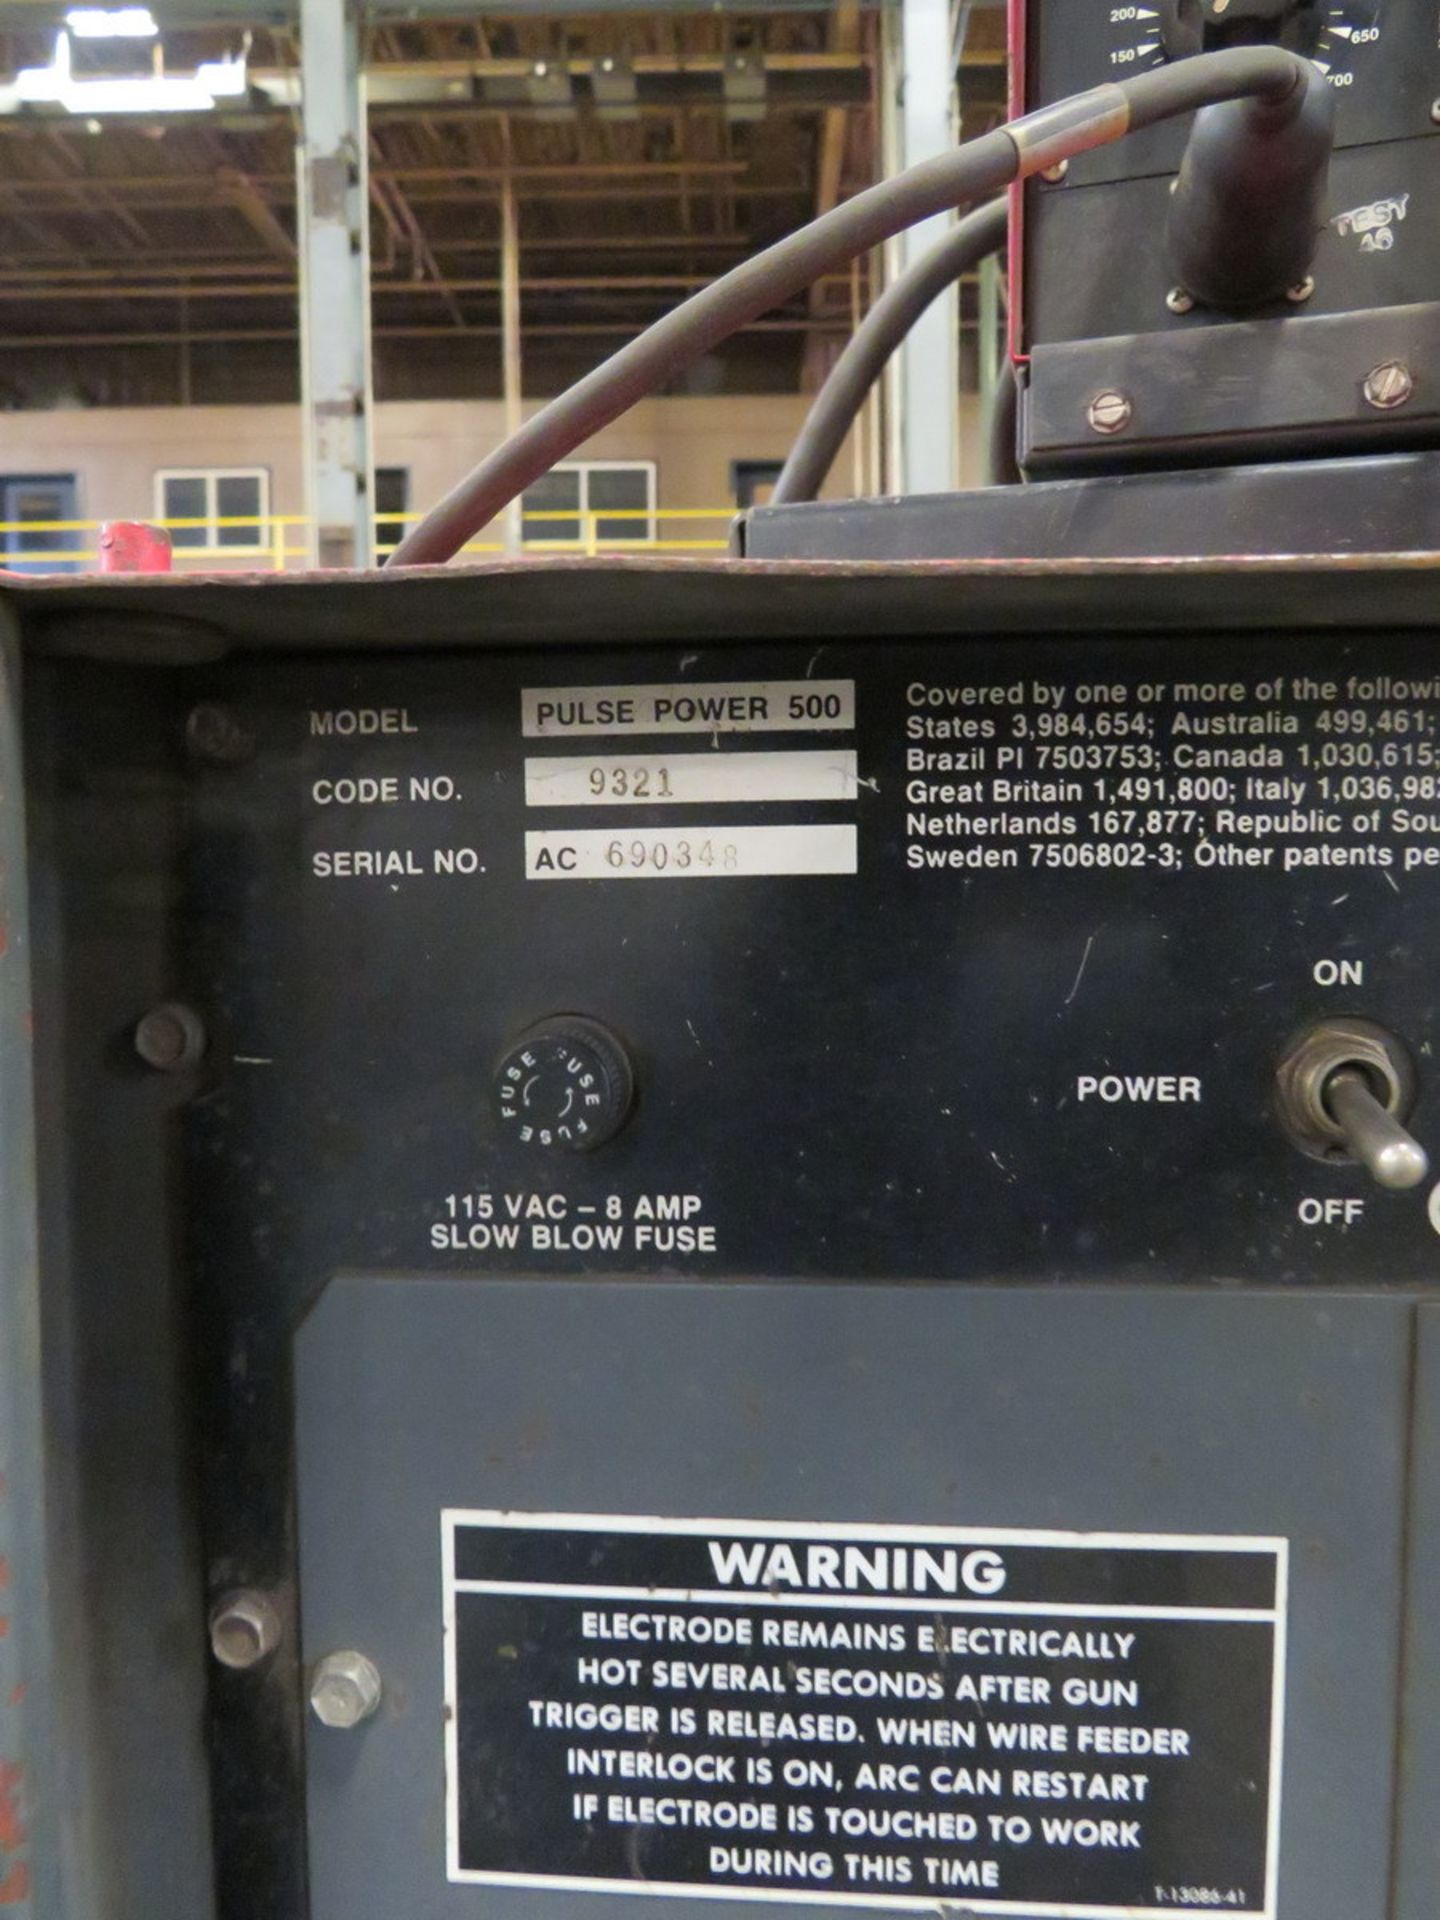 Lincoln Ideal Arc Pulse Power 500 DC Arc Welding Power Source - Image 8 of 8